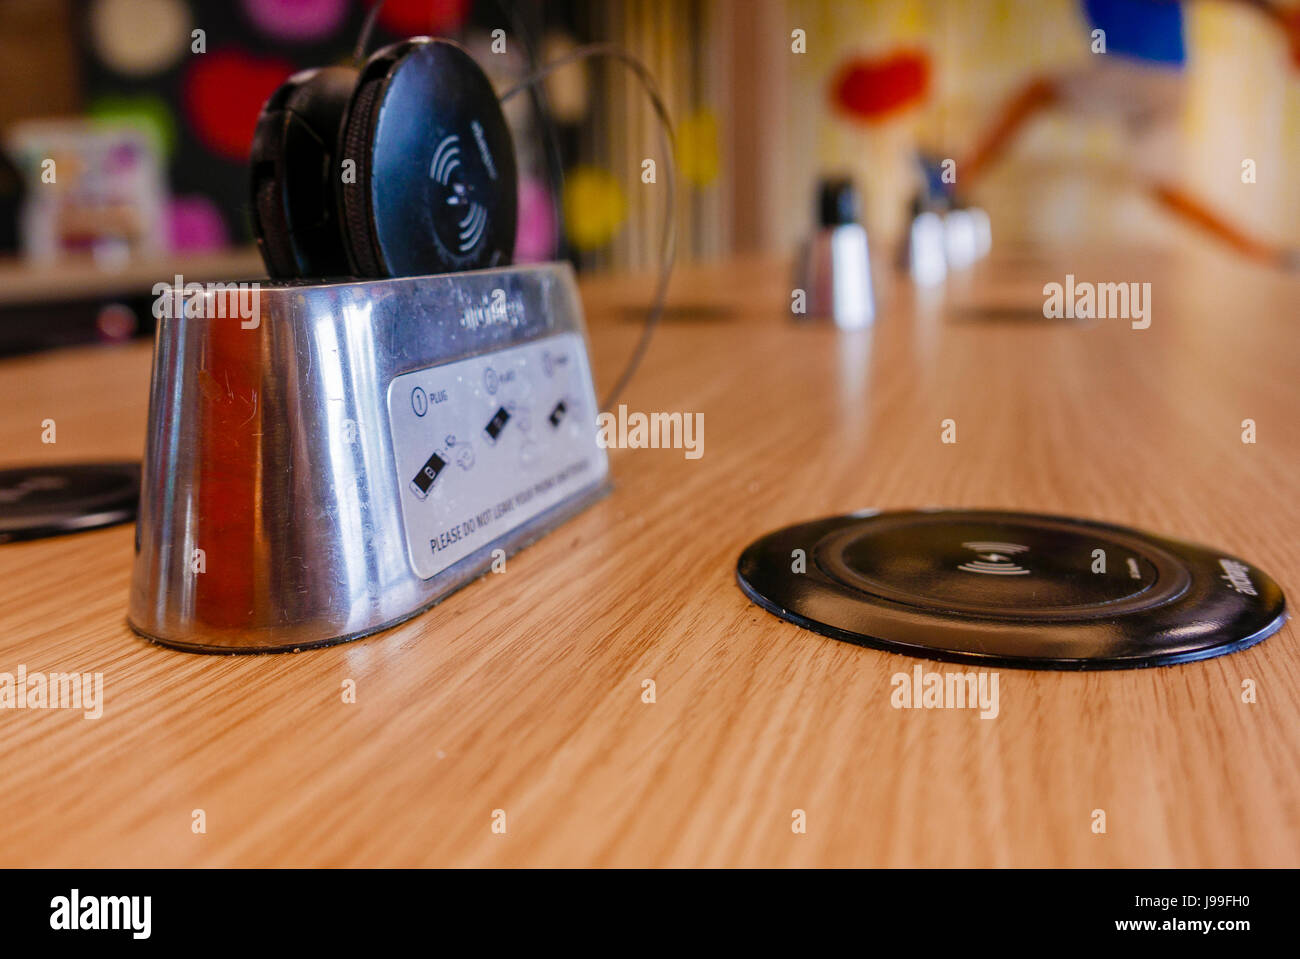 QI wireless chargers built into a table at a McDonald's restaurant, with wireless receiver adapters for devices without wireless capability Stock Photo